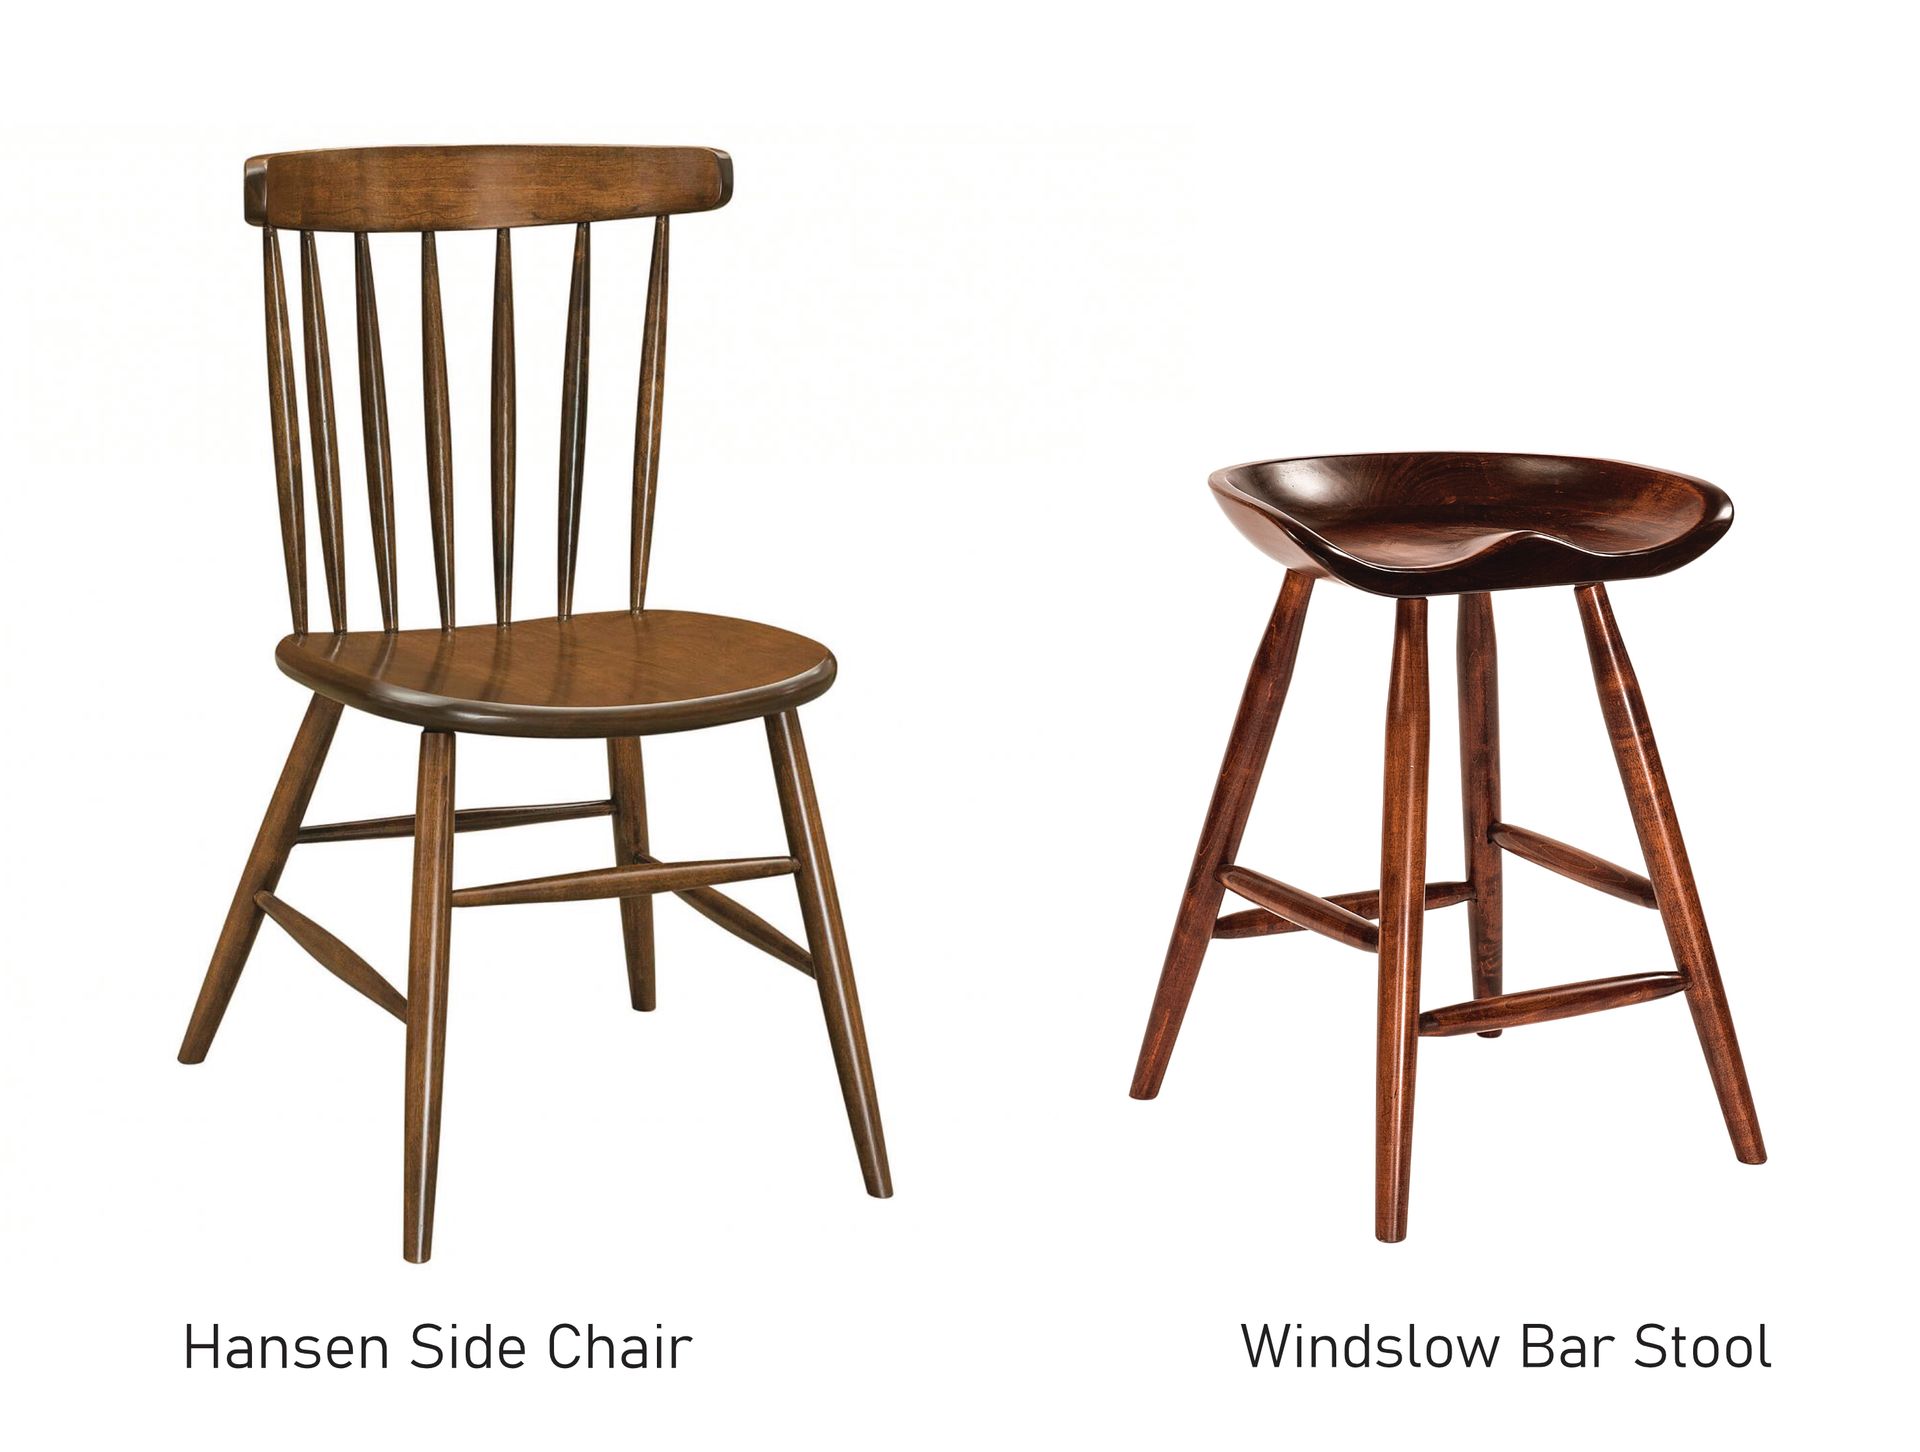 Pairing Dining Chairs And Bar Stools, Dining Room Chairs With Matching Bar Stools